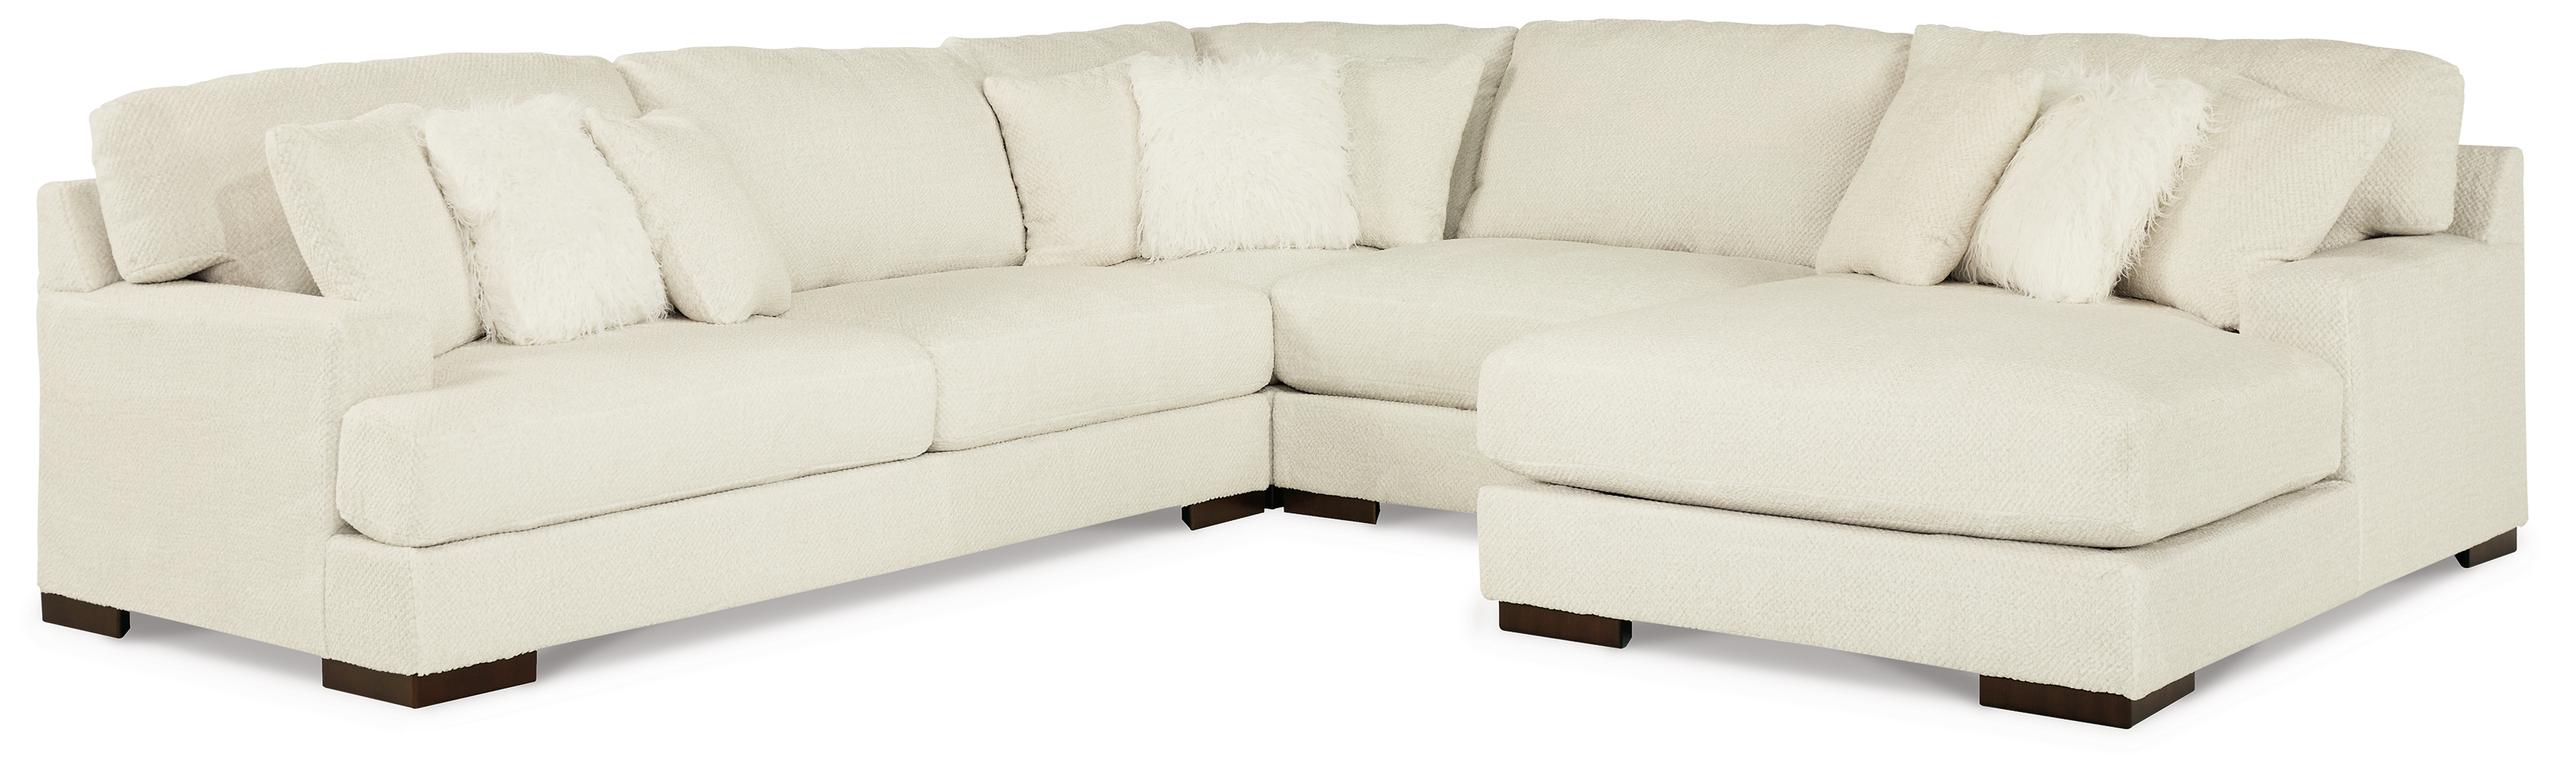 ASHLEY FURNITURE 52204S7 Zada 4-piece Sectional With Chaise